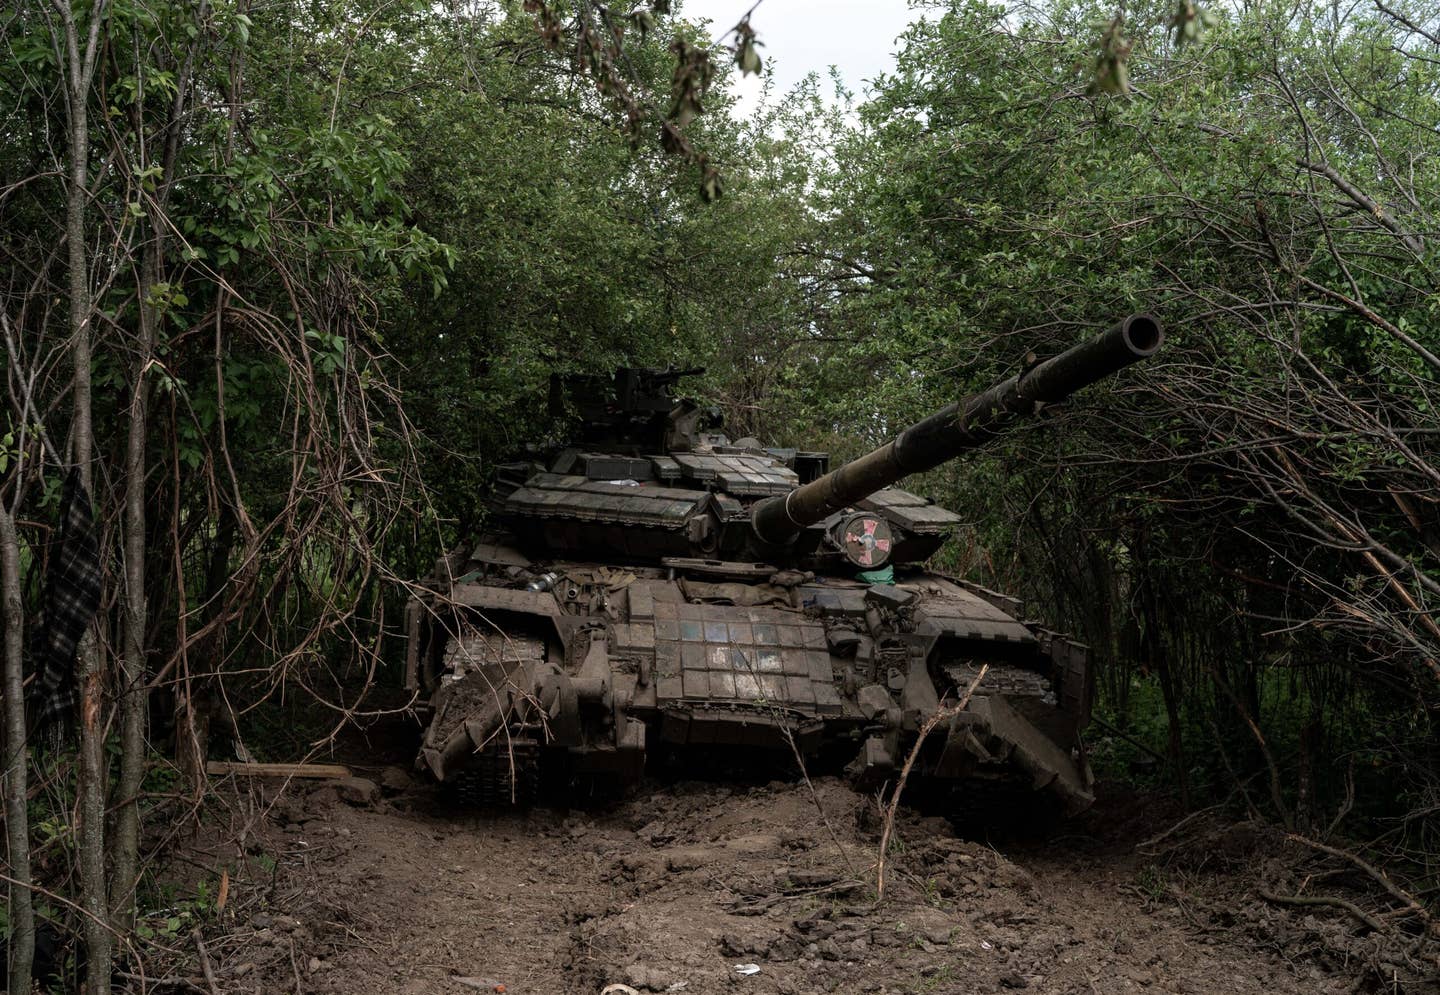 A tank of the 57th Brigade of the Ukrainian Army in Donetsk Oblast, Ukraine, on May 15, 2023. <em>Photo by Vincenzo Circosta/Anadolu Agency via Getty Images</em>